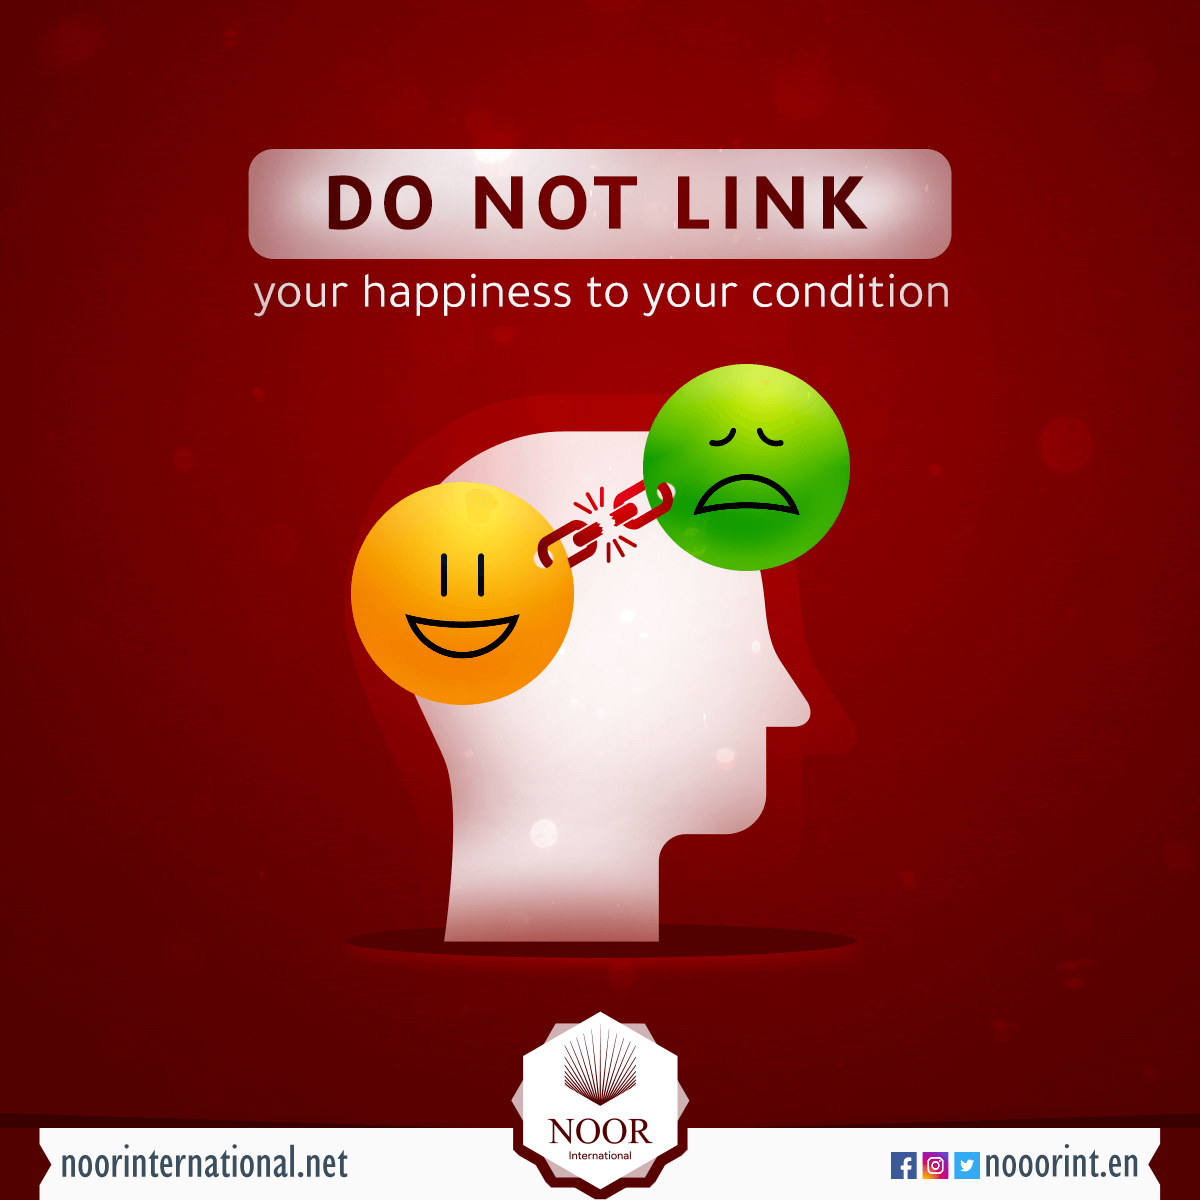 Do not link your happiness to your condition